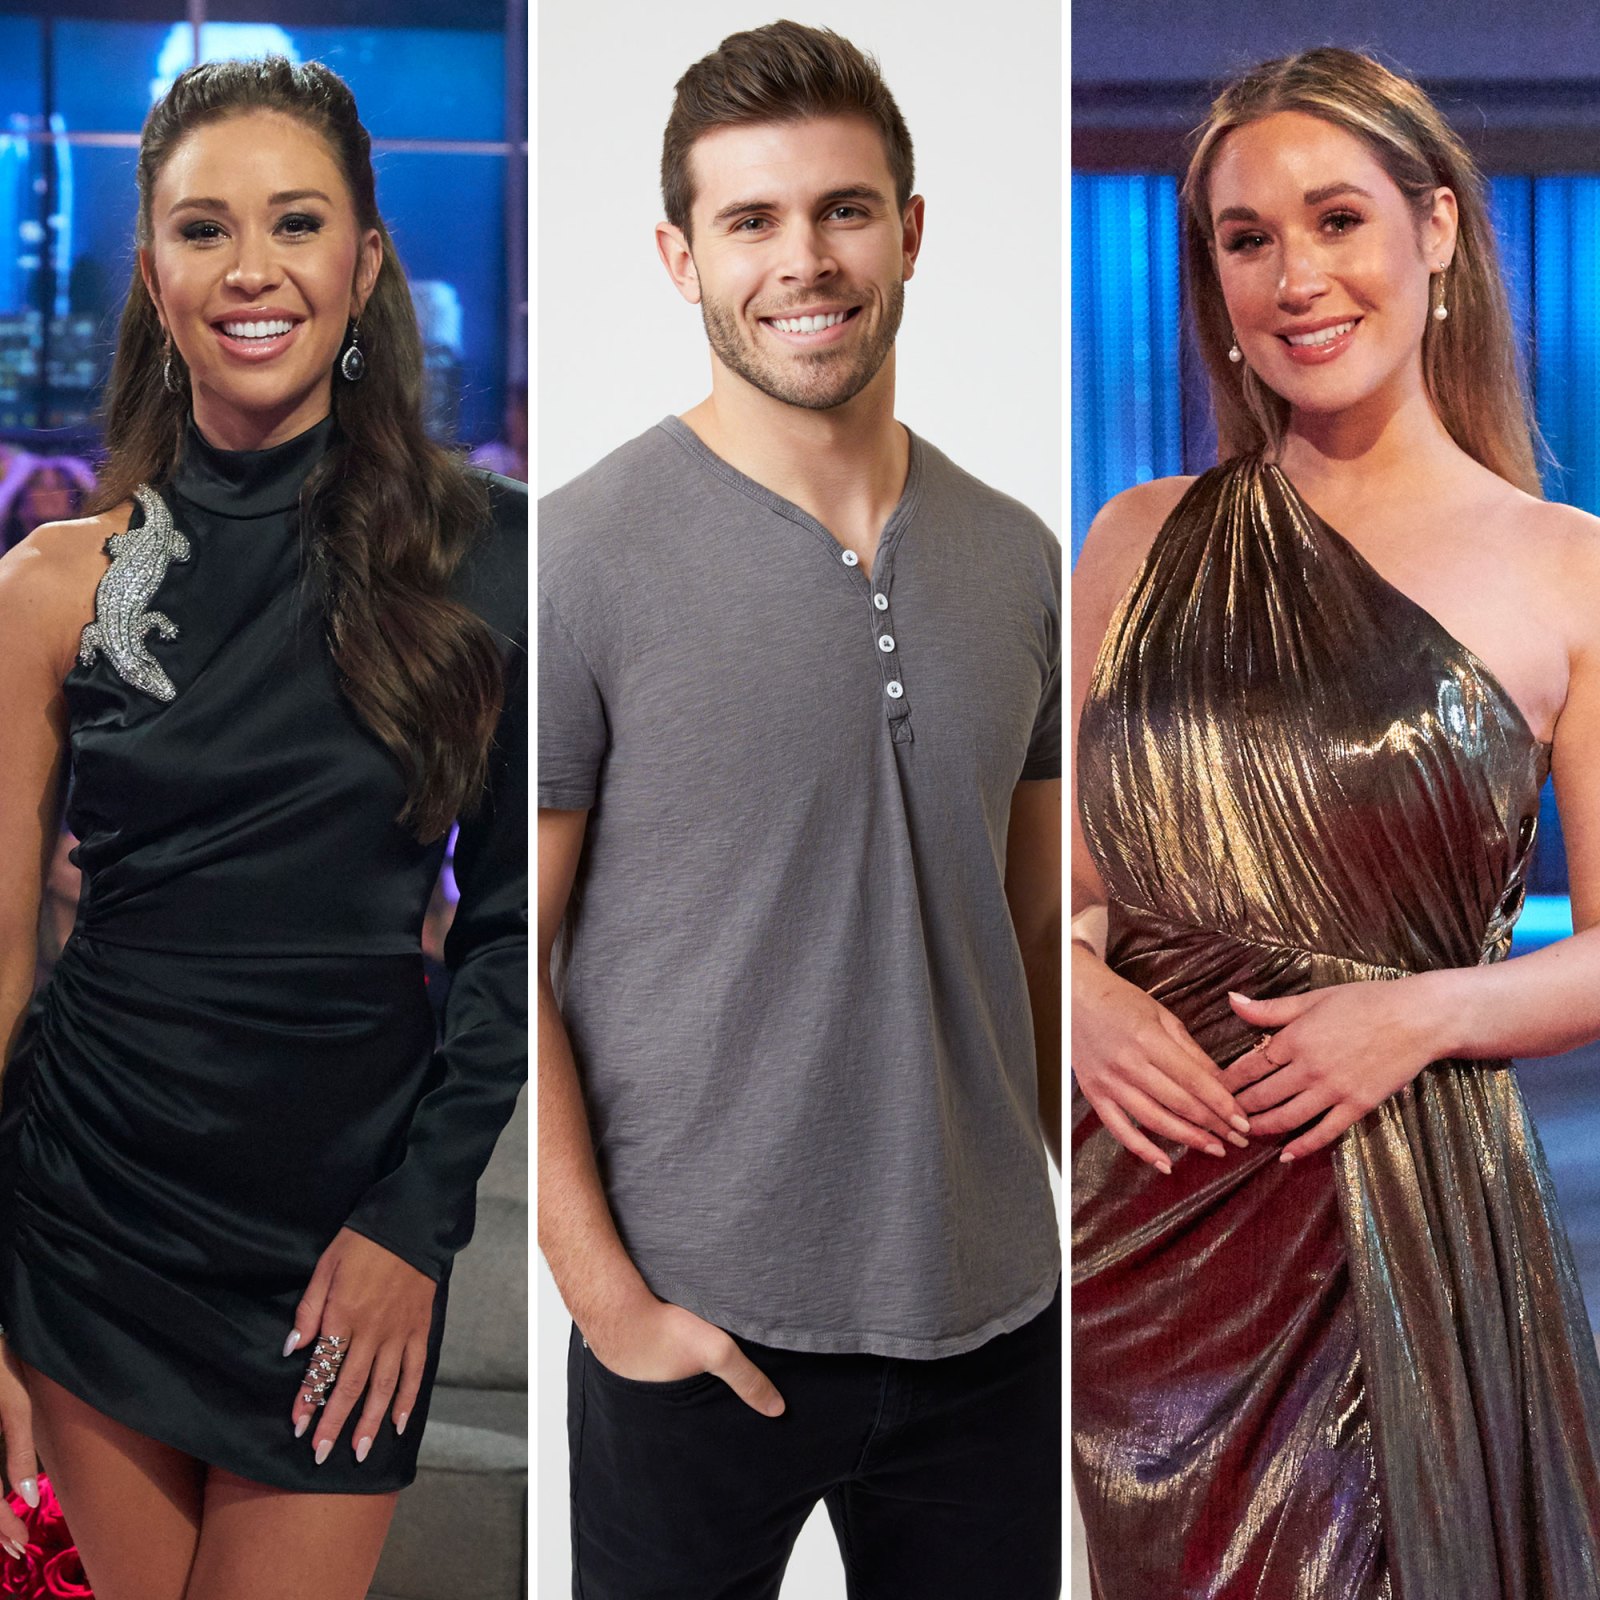 Bachelorette’ Recap Erich Is Gabby’s Only Suitor Remaining as Rachel Falls for Tino and Aven and Zach Calls Her Inauthentic